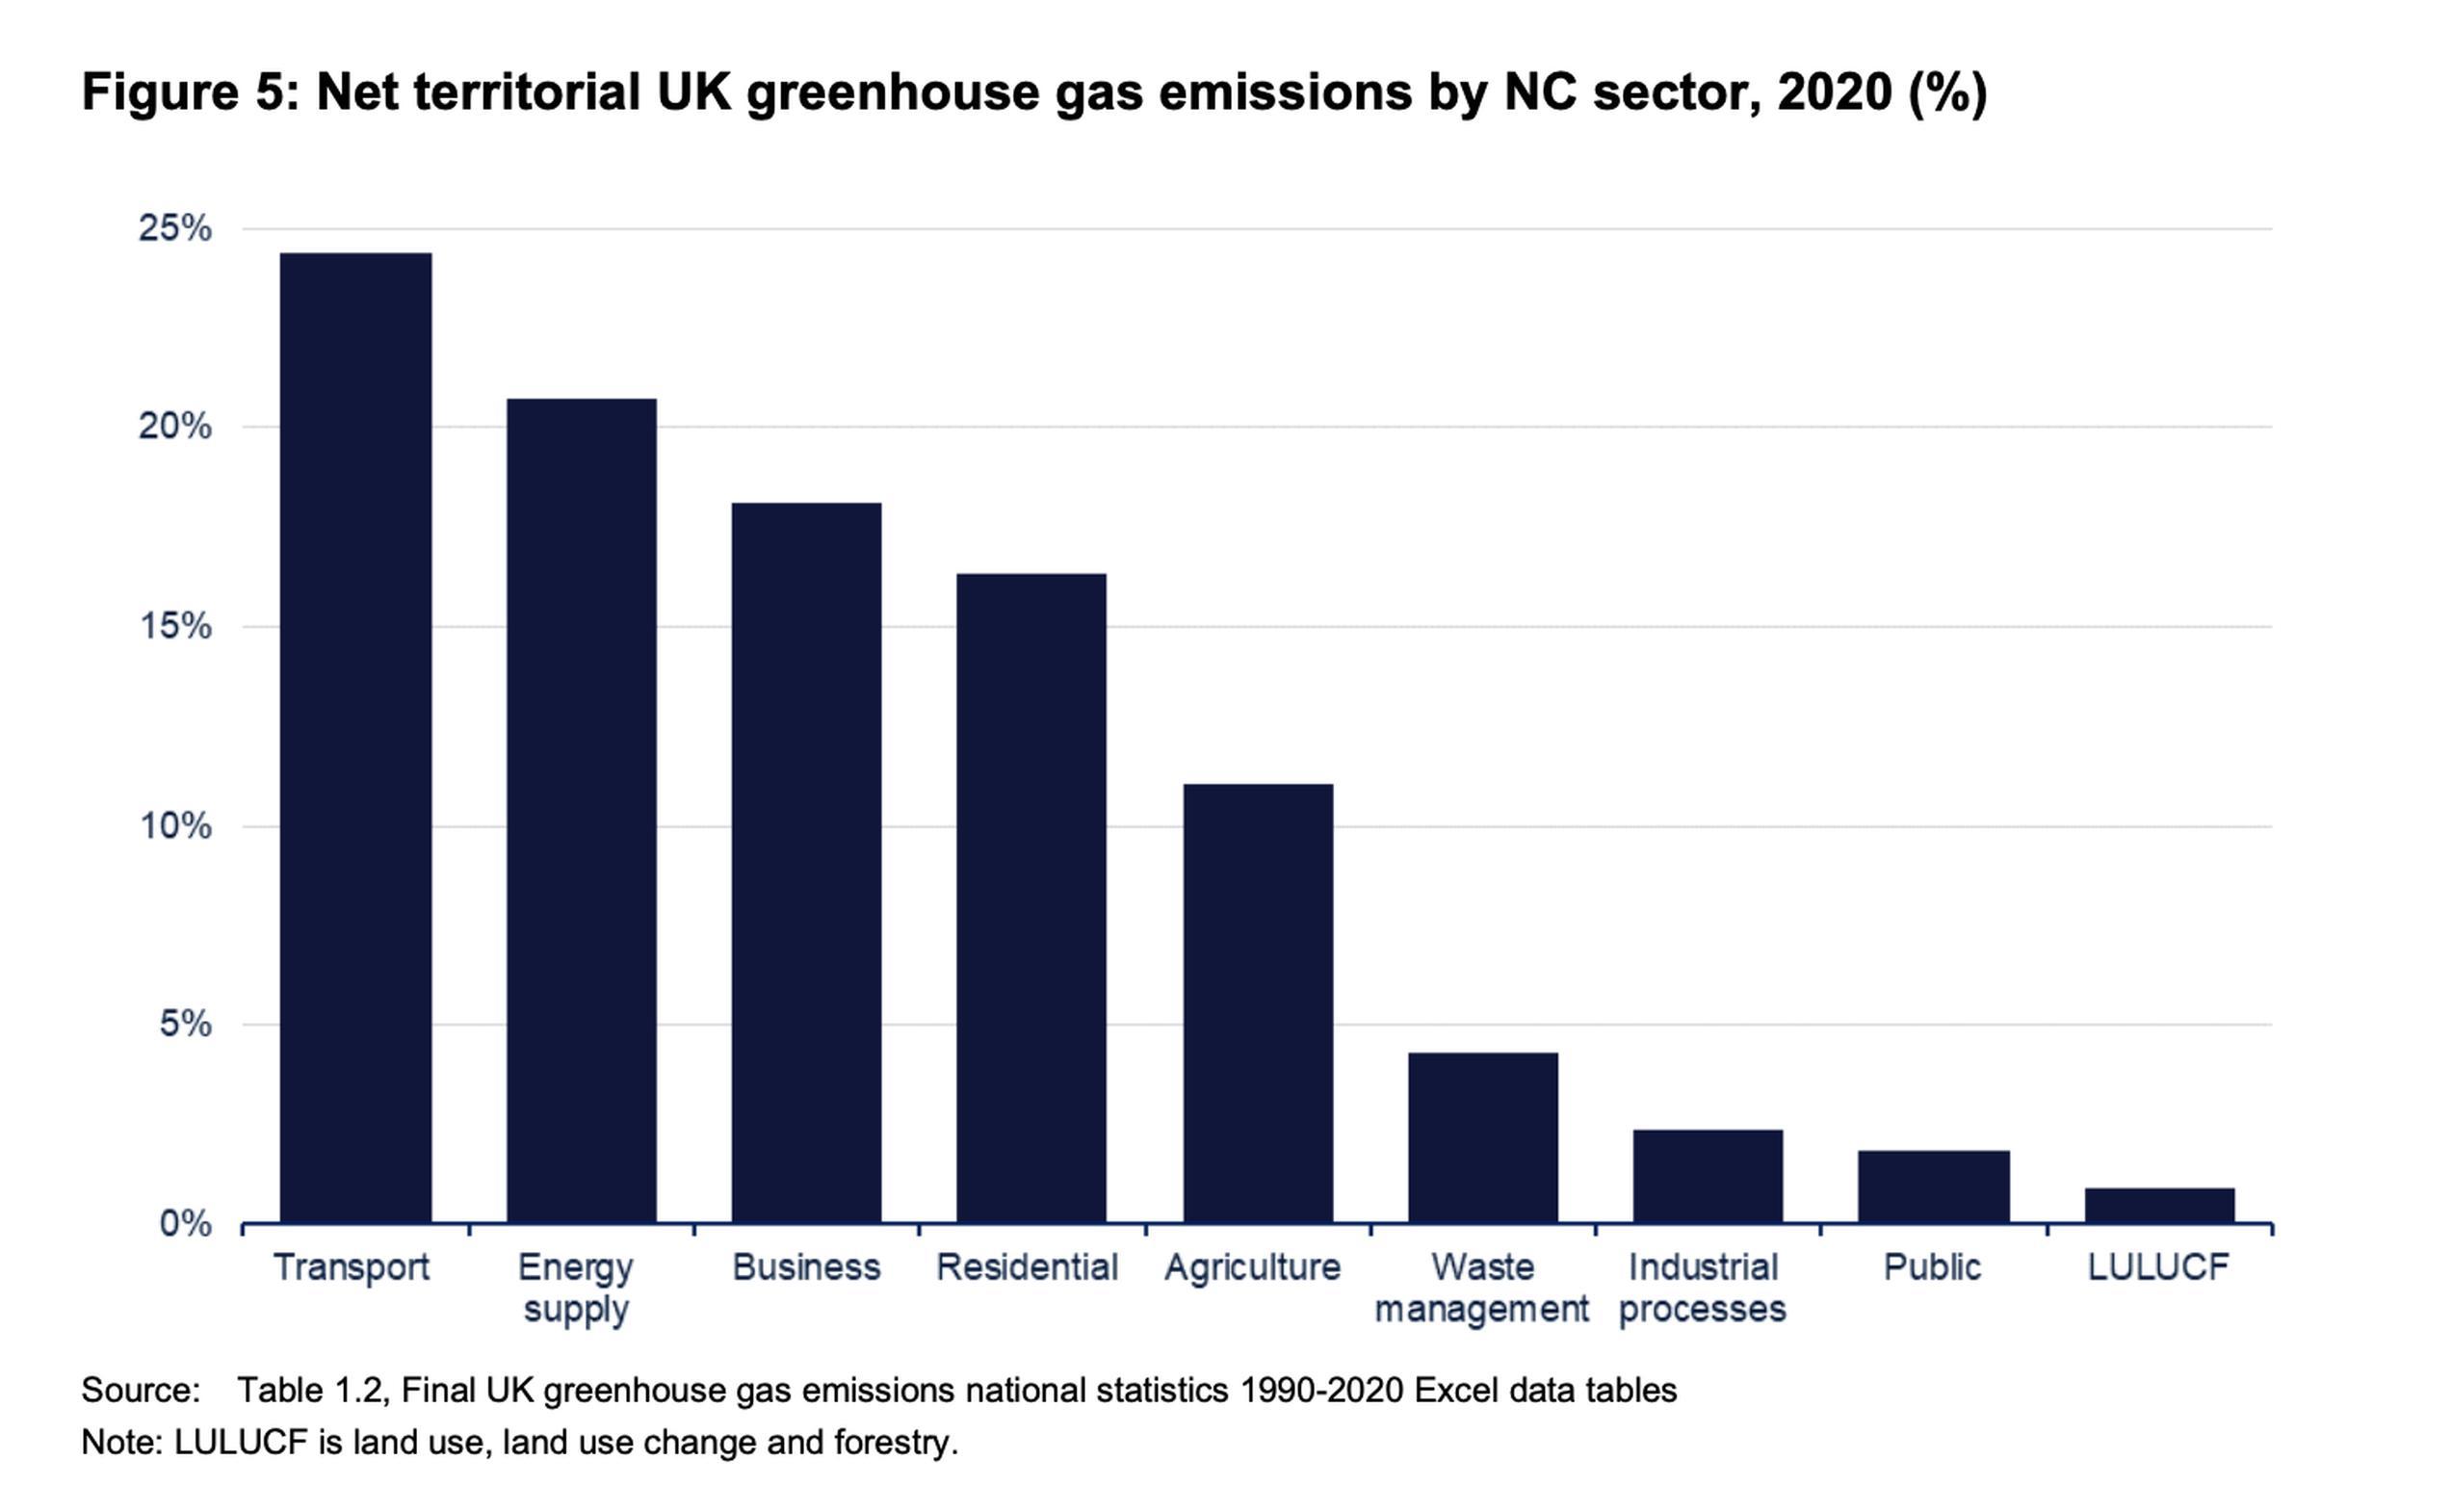 Net territorial greenhouse gas emissions by sector